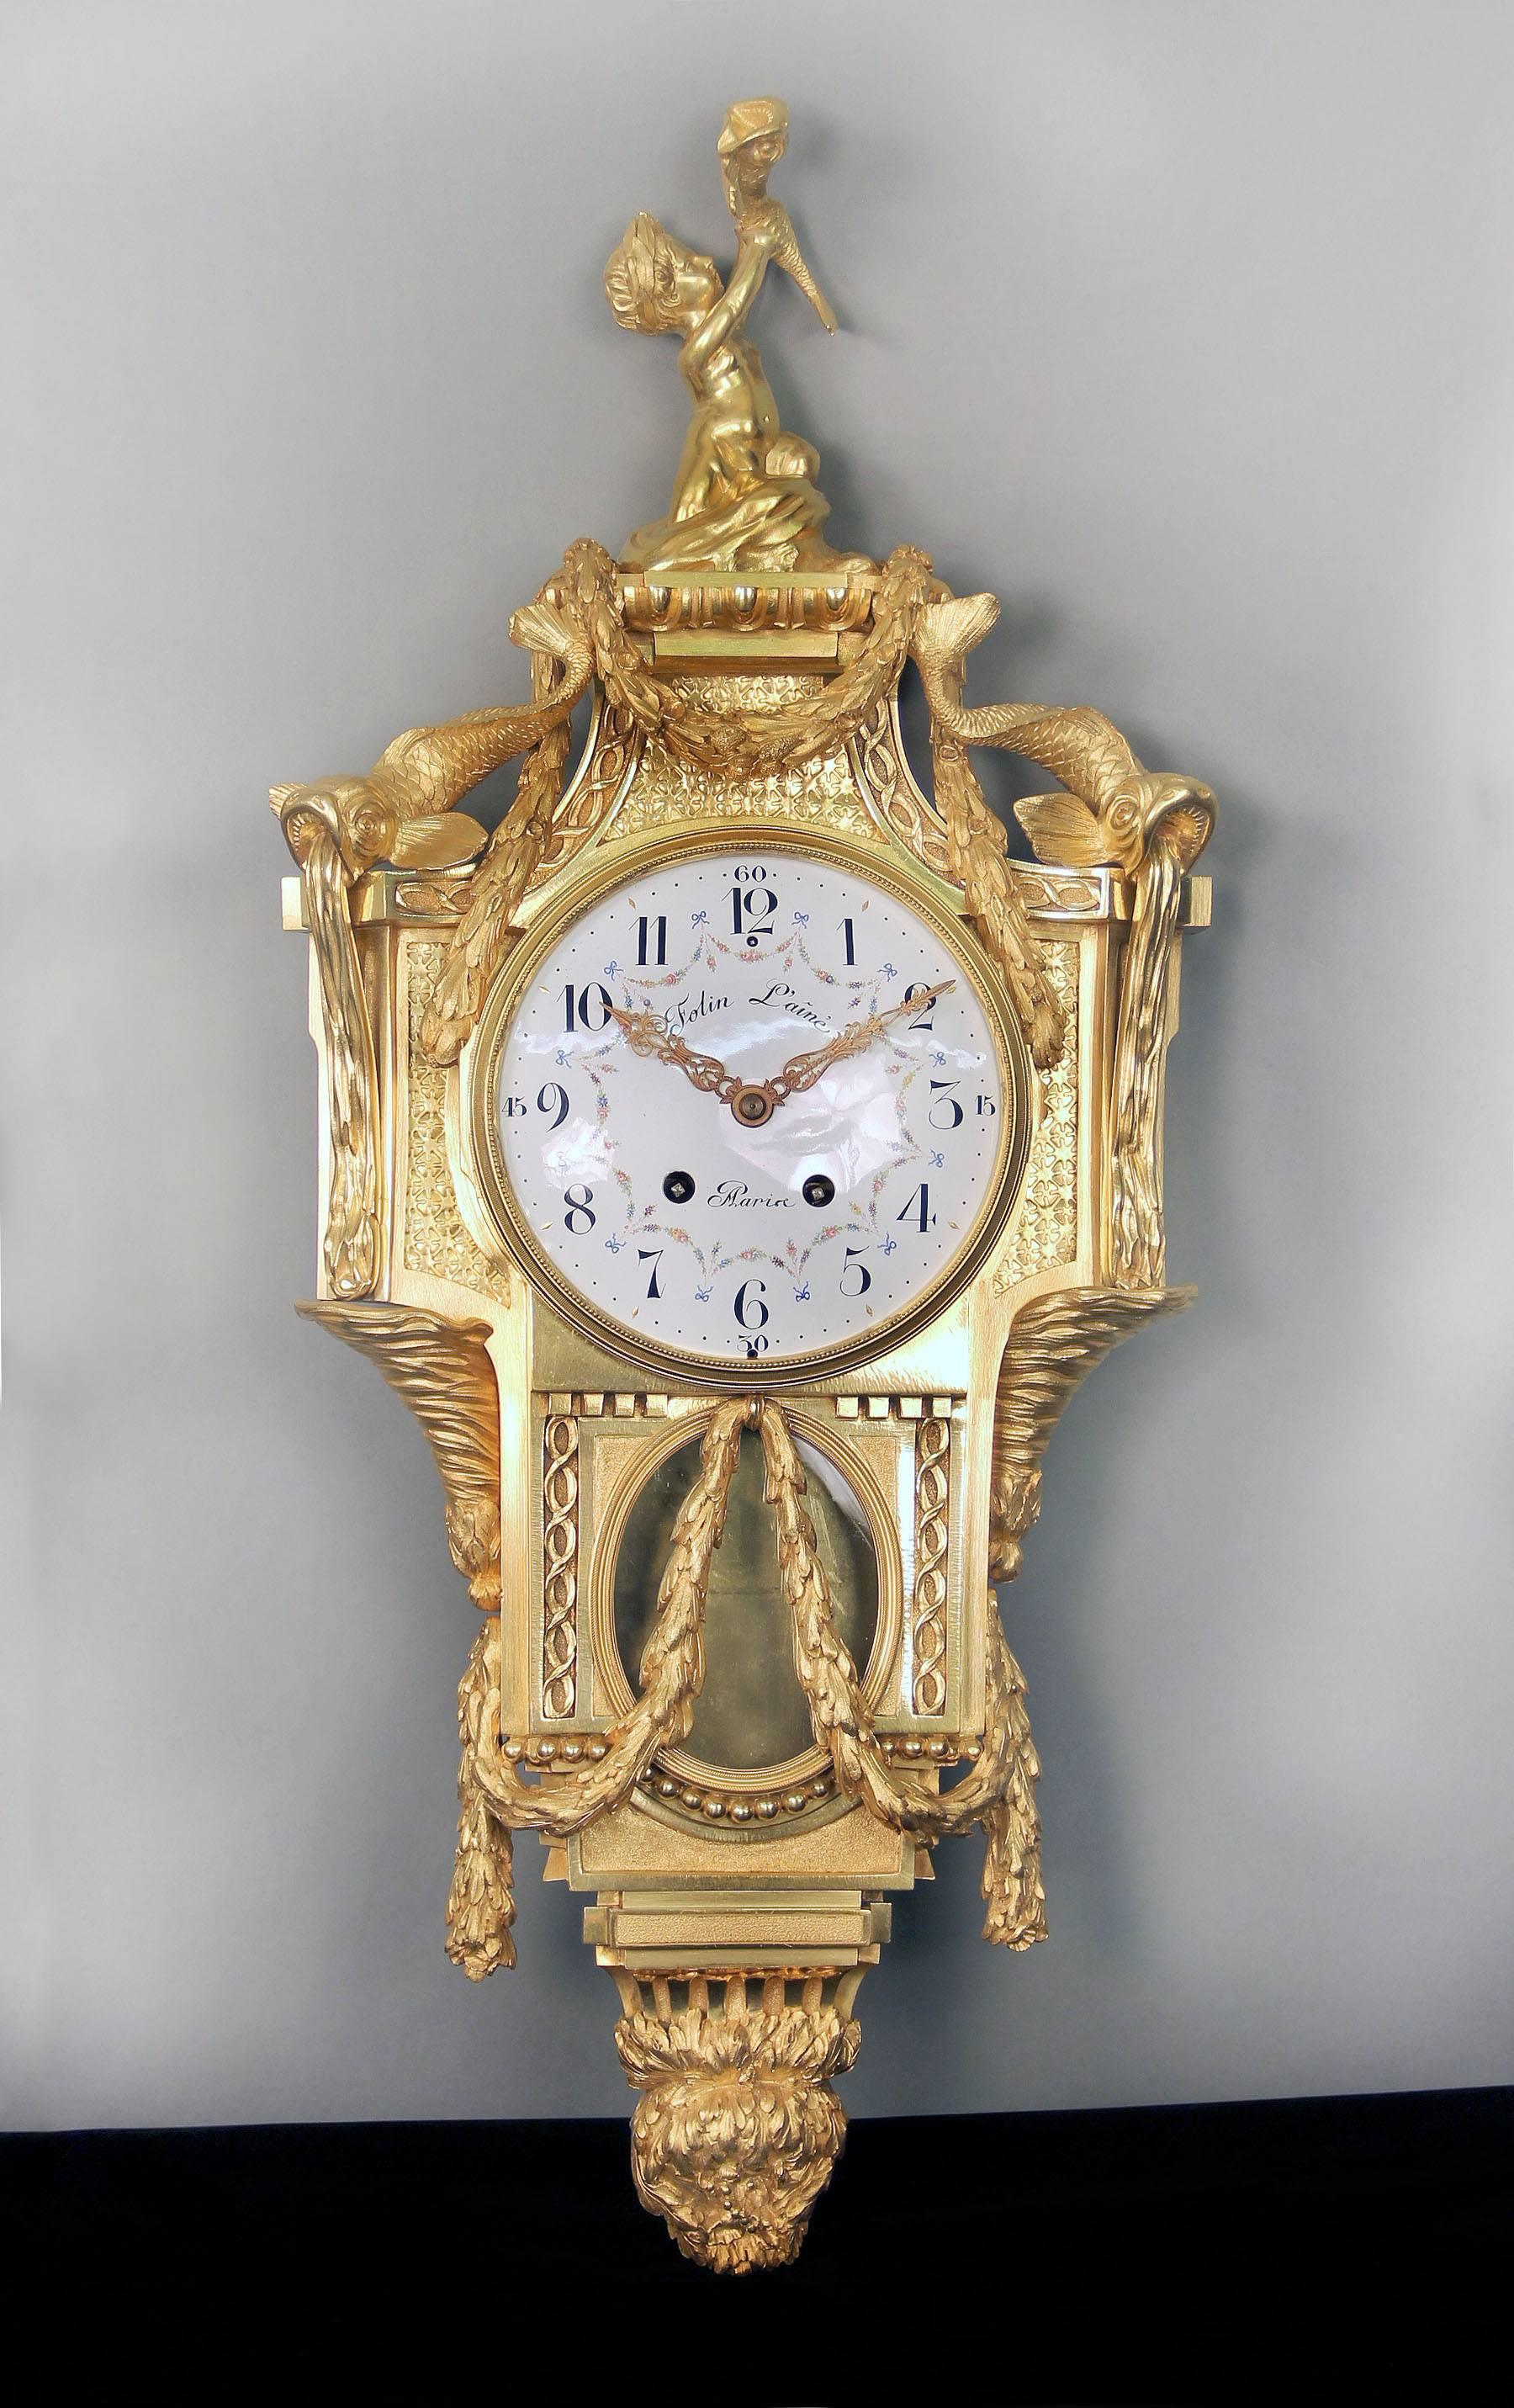 An exceptional late 19th century gilt bronze Cartel clock and companion barometer

By Henry Vian after Jean-Charles Delafosse

The tops with a putti holding a fish above garlands, two dolphins sit on each corner and the base designed with more